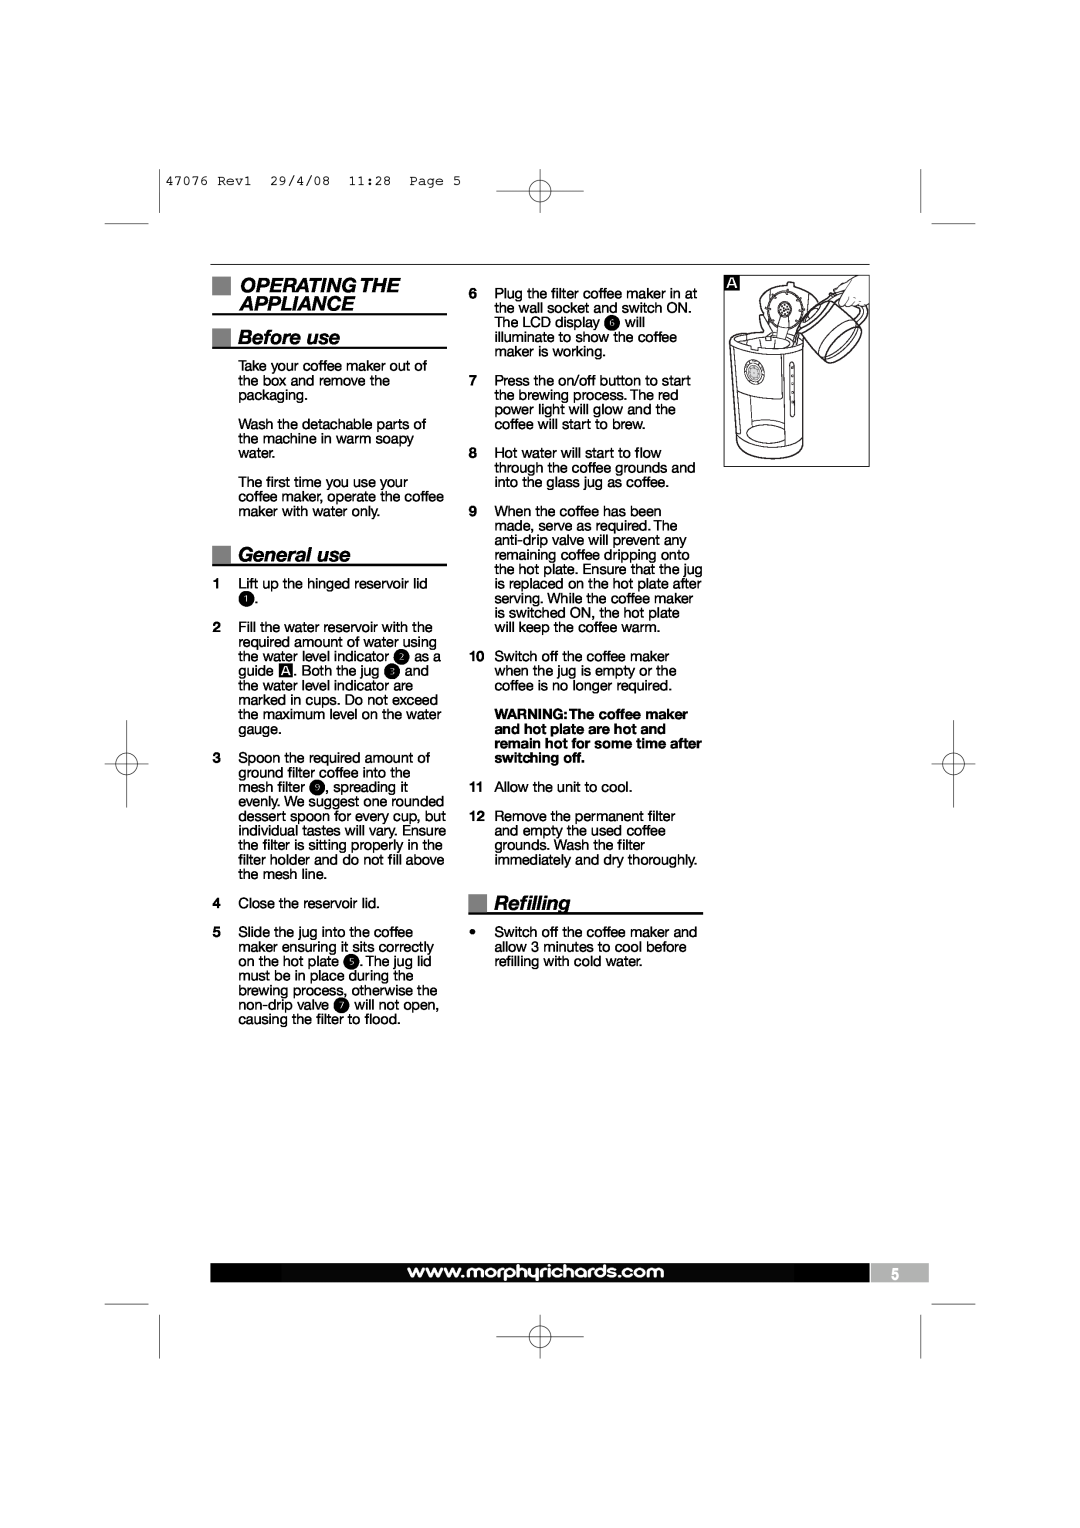 Morphy Richards 47076 manual OPERATING THE APPLIANCE Before use, General use, Refilling 